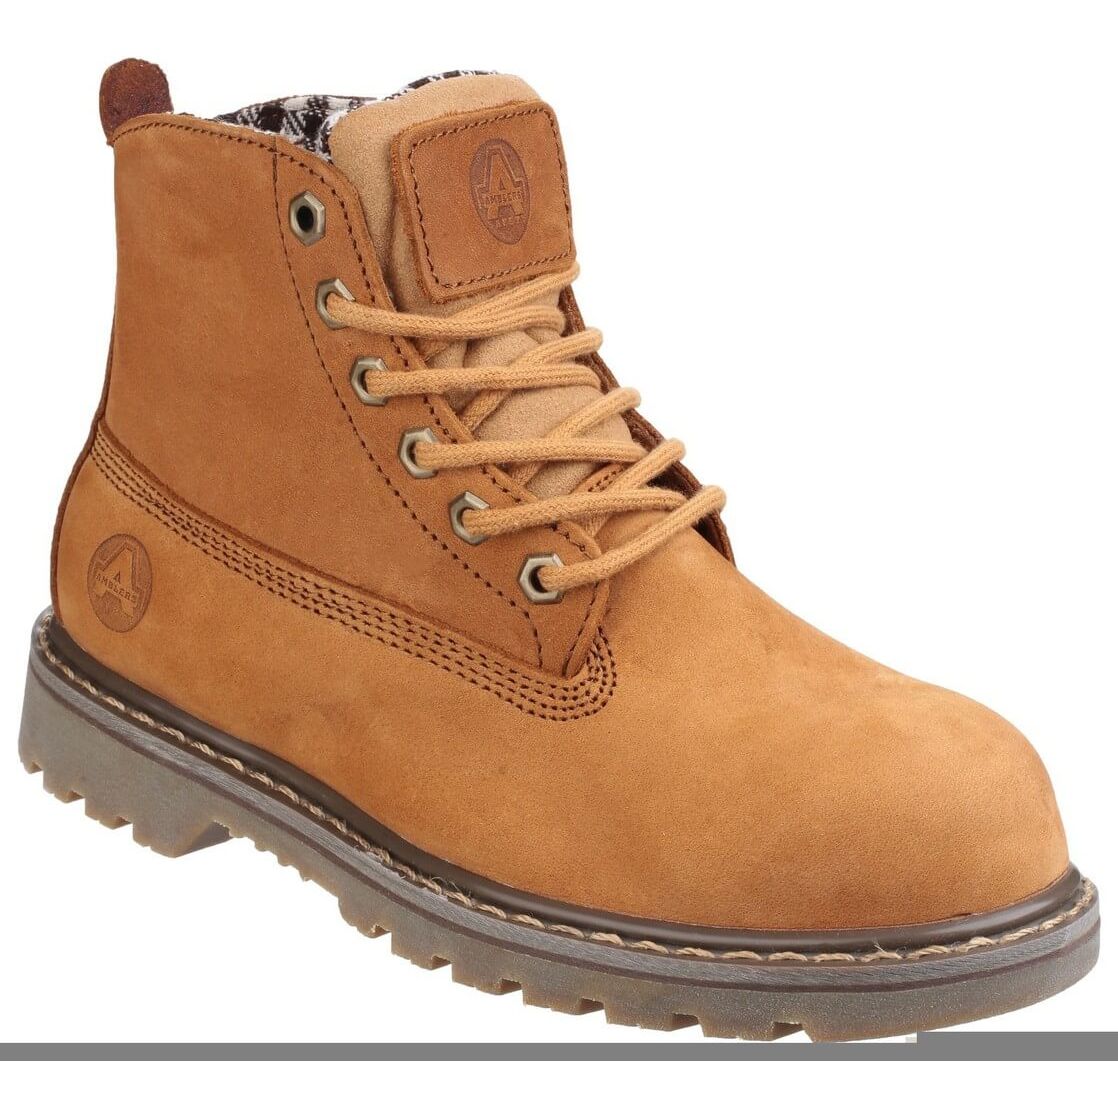 Amblers Fs103 Goodyear Welted Safety Boots Womens - workweargurus.com